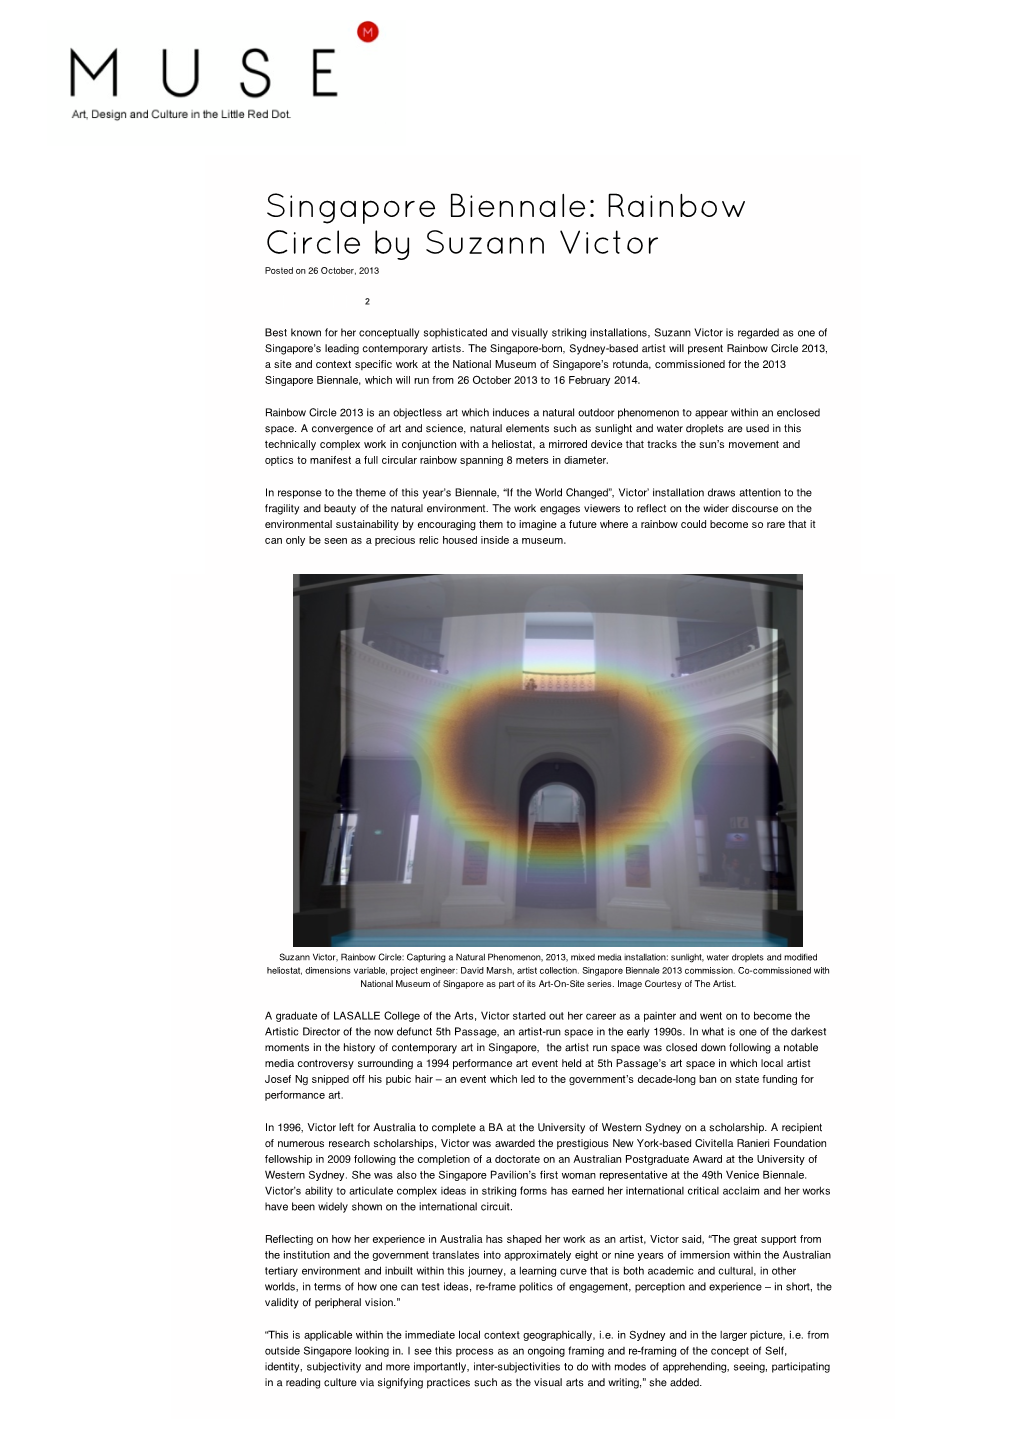 Rainbow Circle by Suzann Victor | the Muse